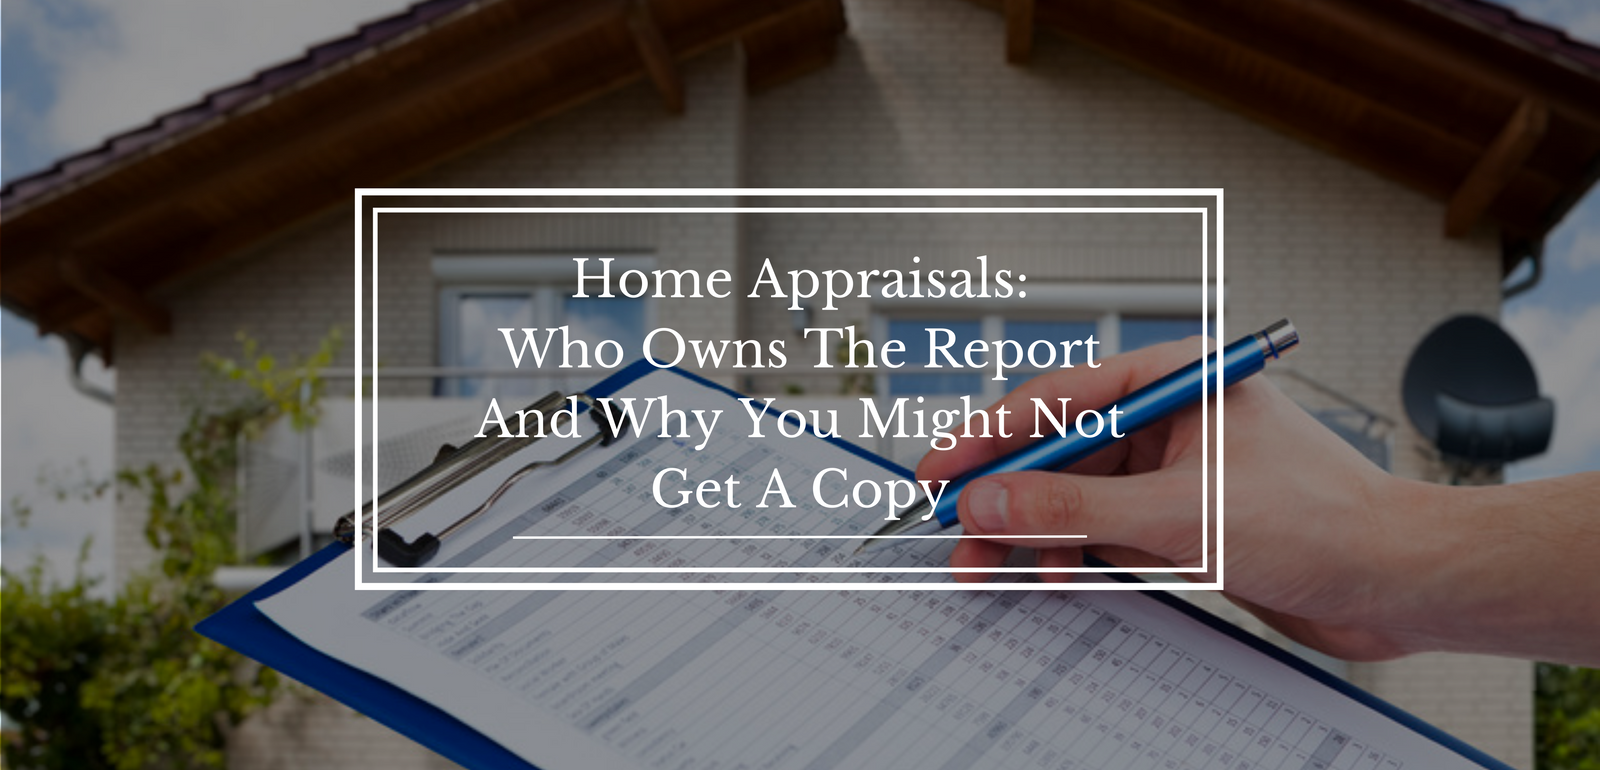 Home Appraisals: Who Owns The Report And Why You Might Not Get A Copy